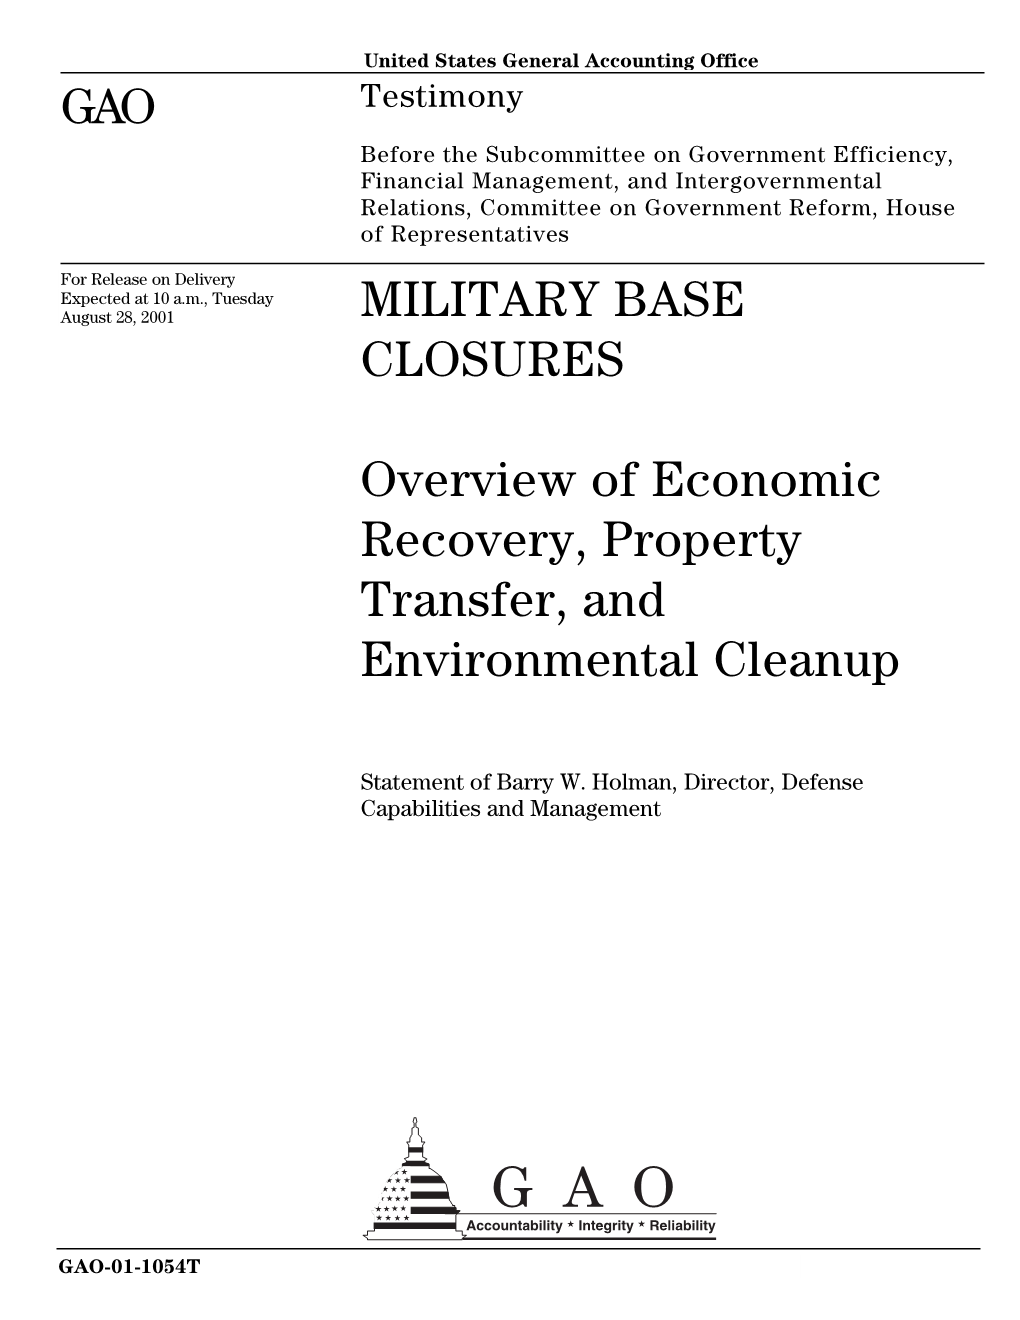 GAO-01-1054T Military Base Closures: Overview of Economic Recovery